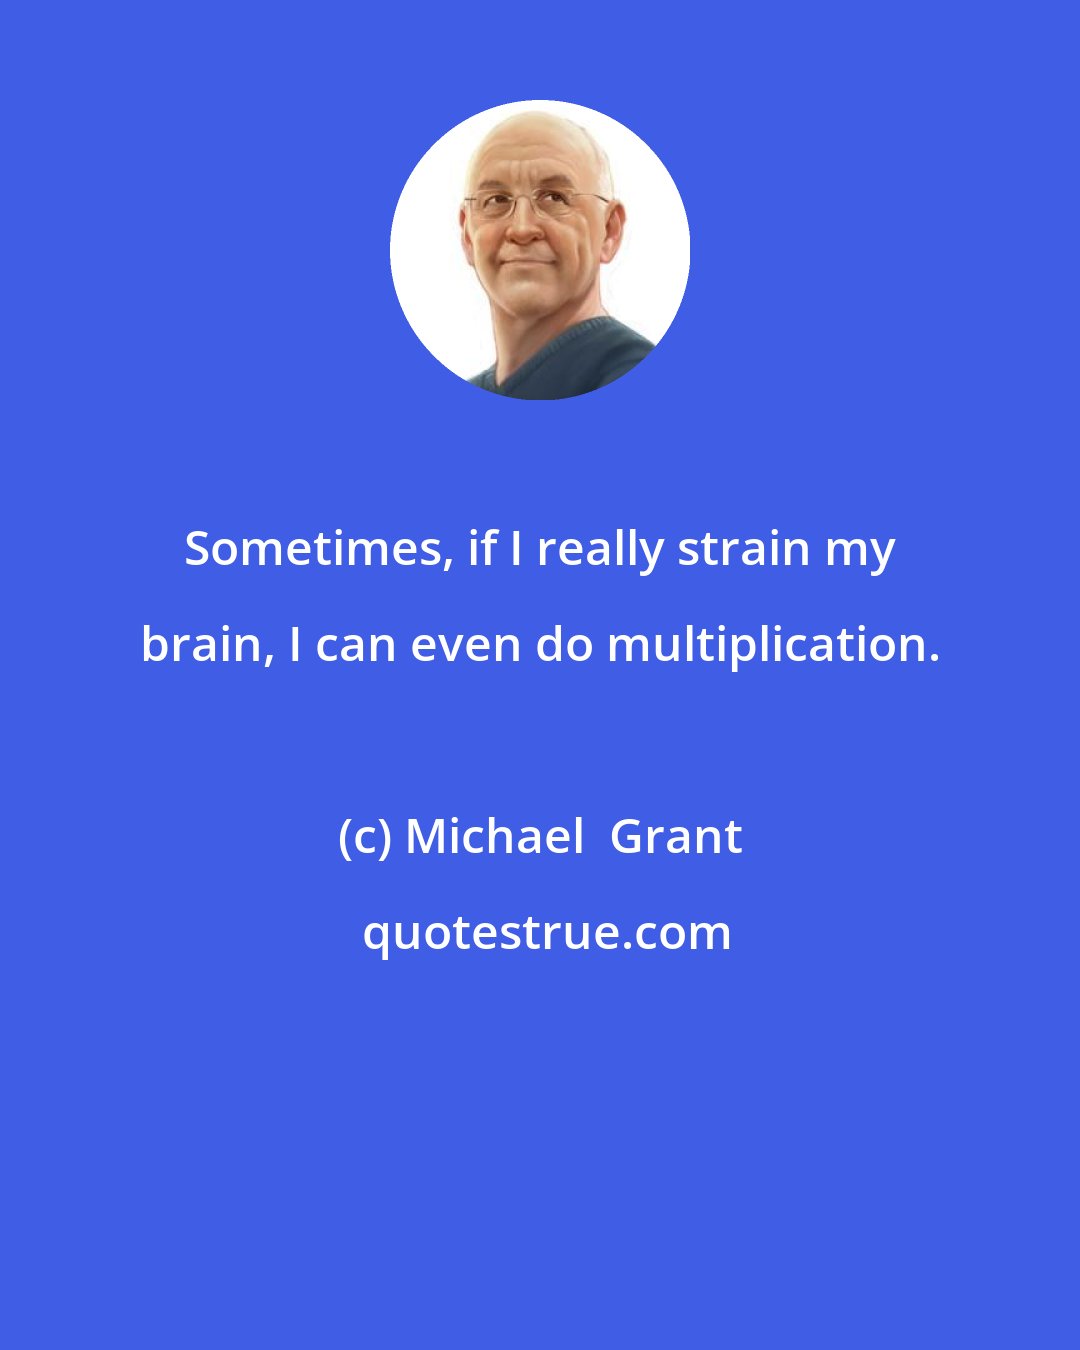 Michael  Grant: Sometimes, if I really strain my brain, I can even do multiplication.